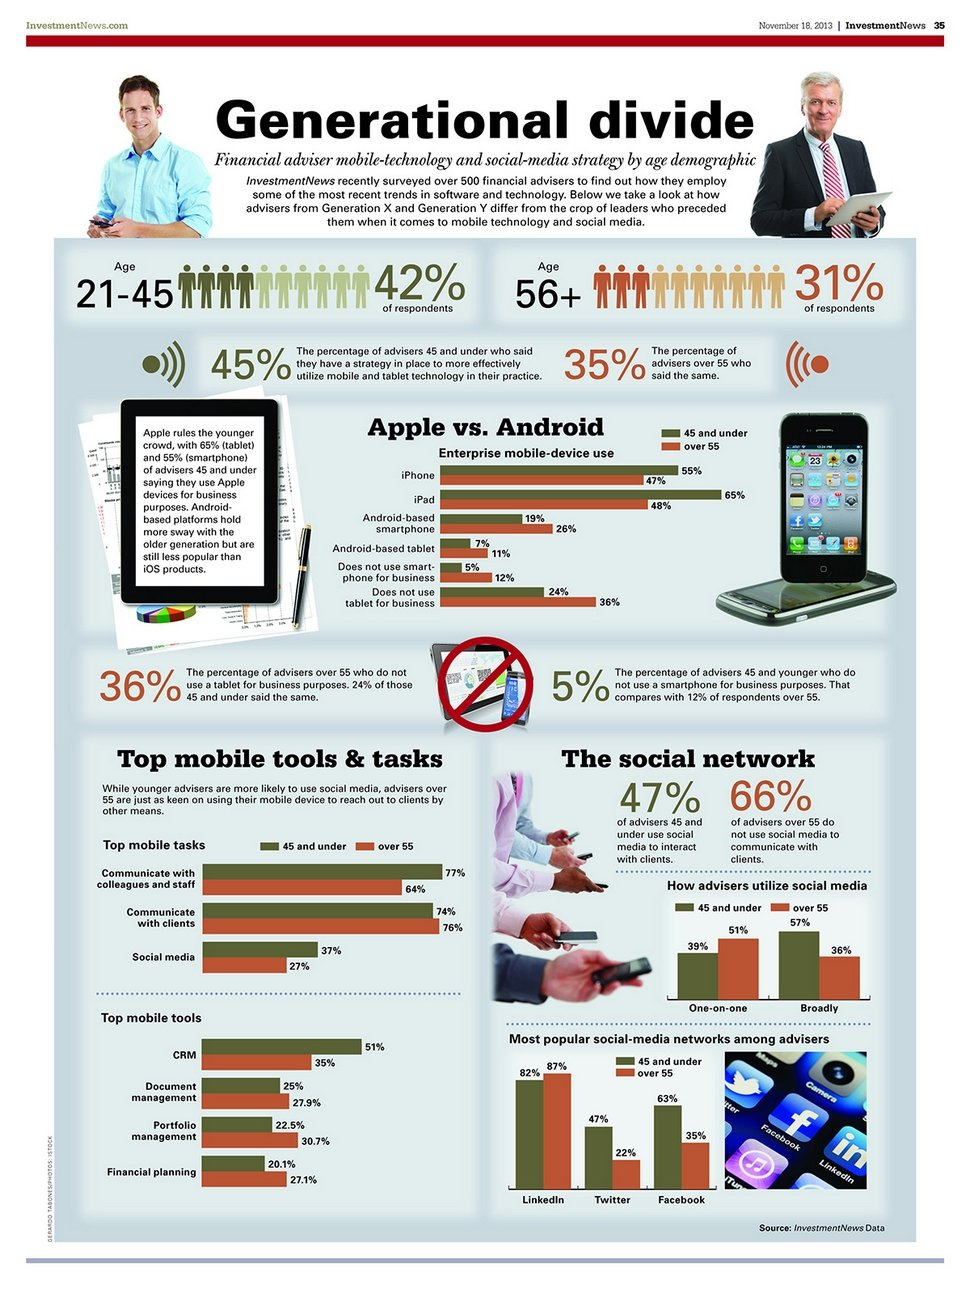 digital marketing for financial services infographic